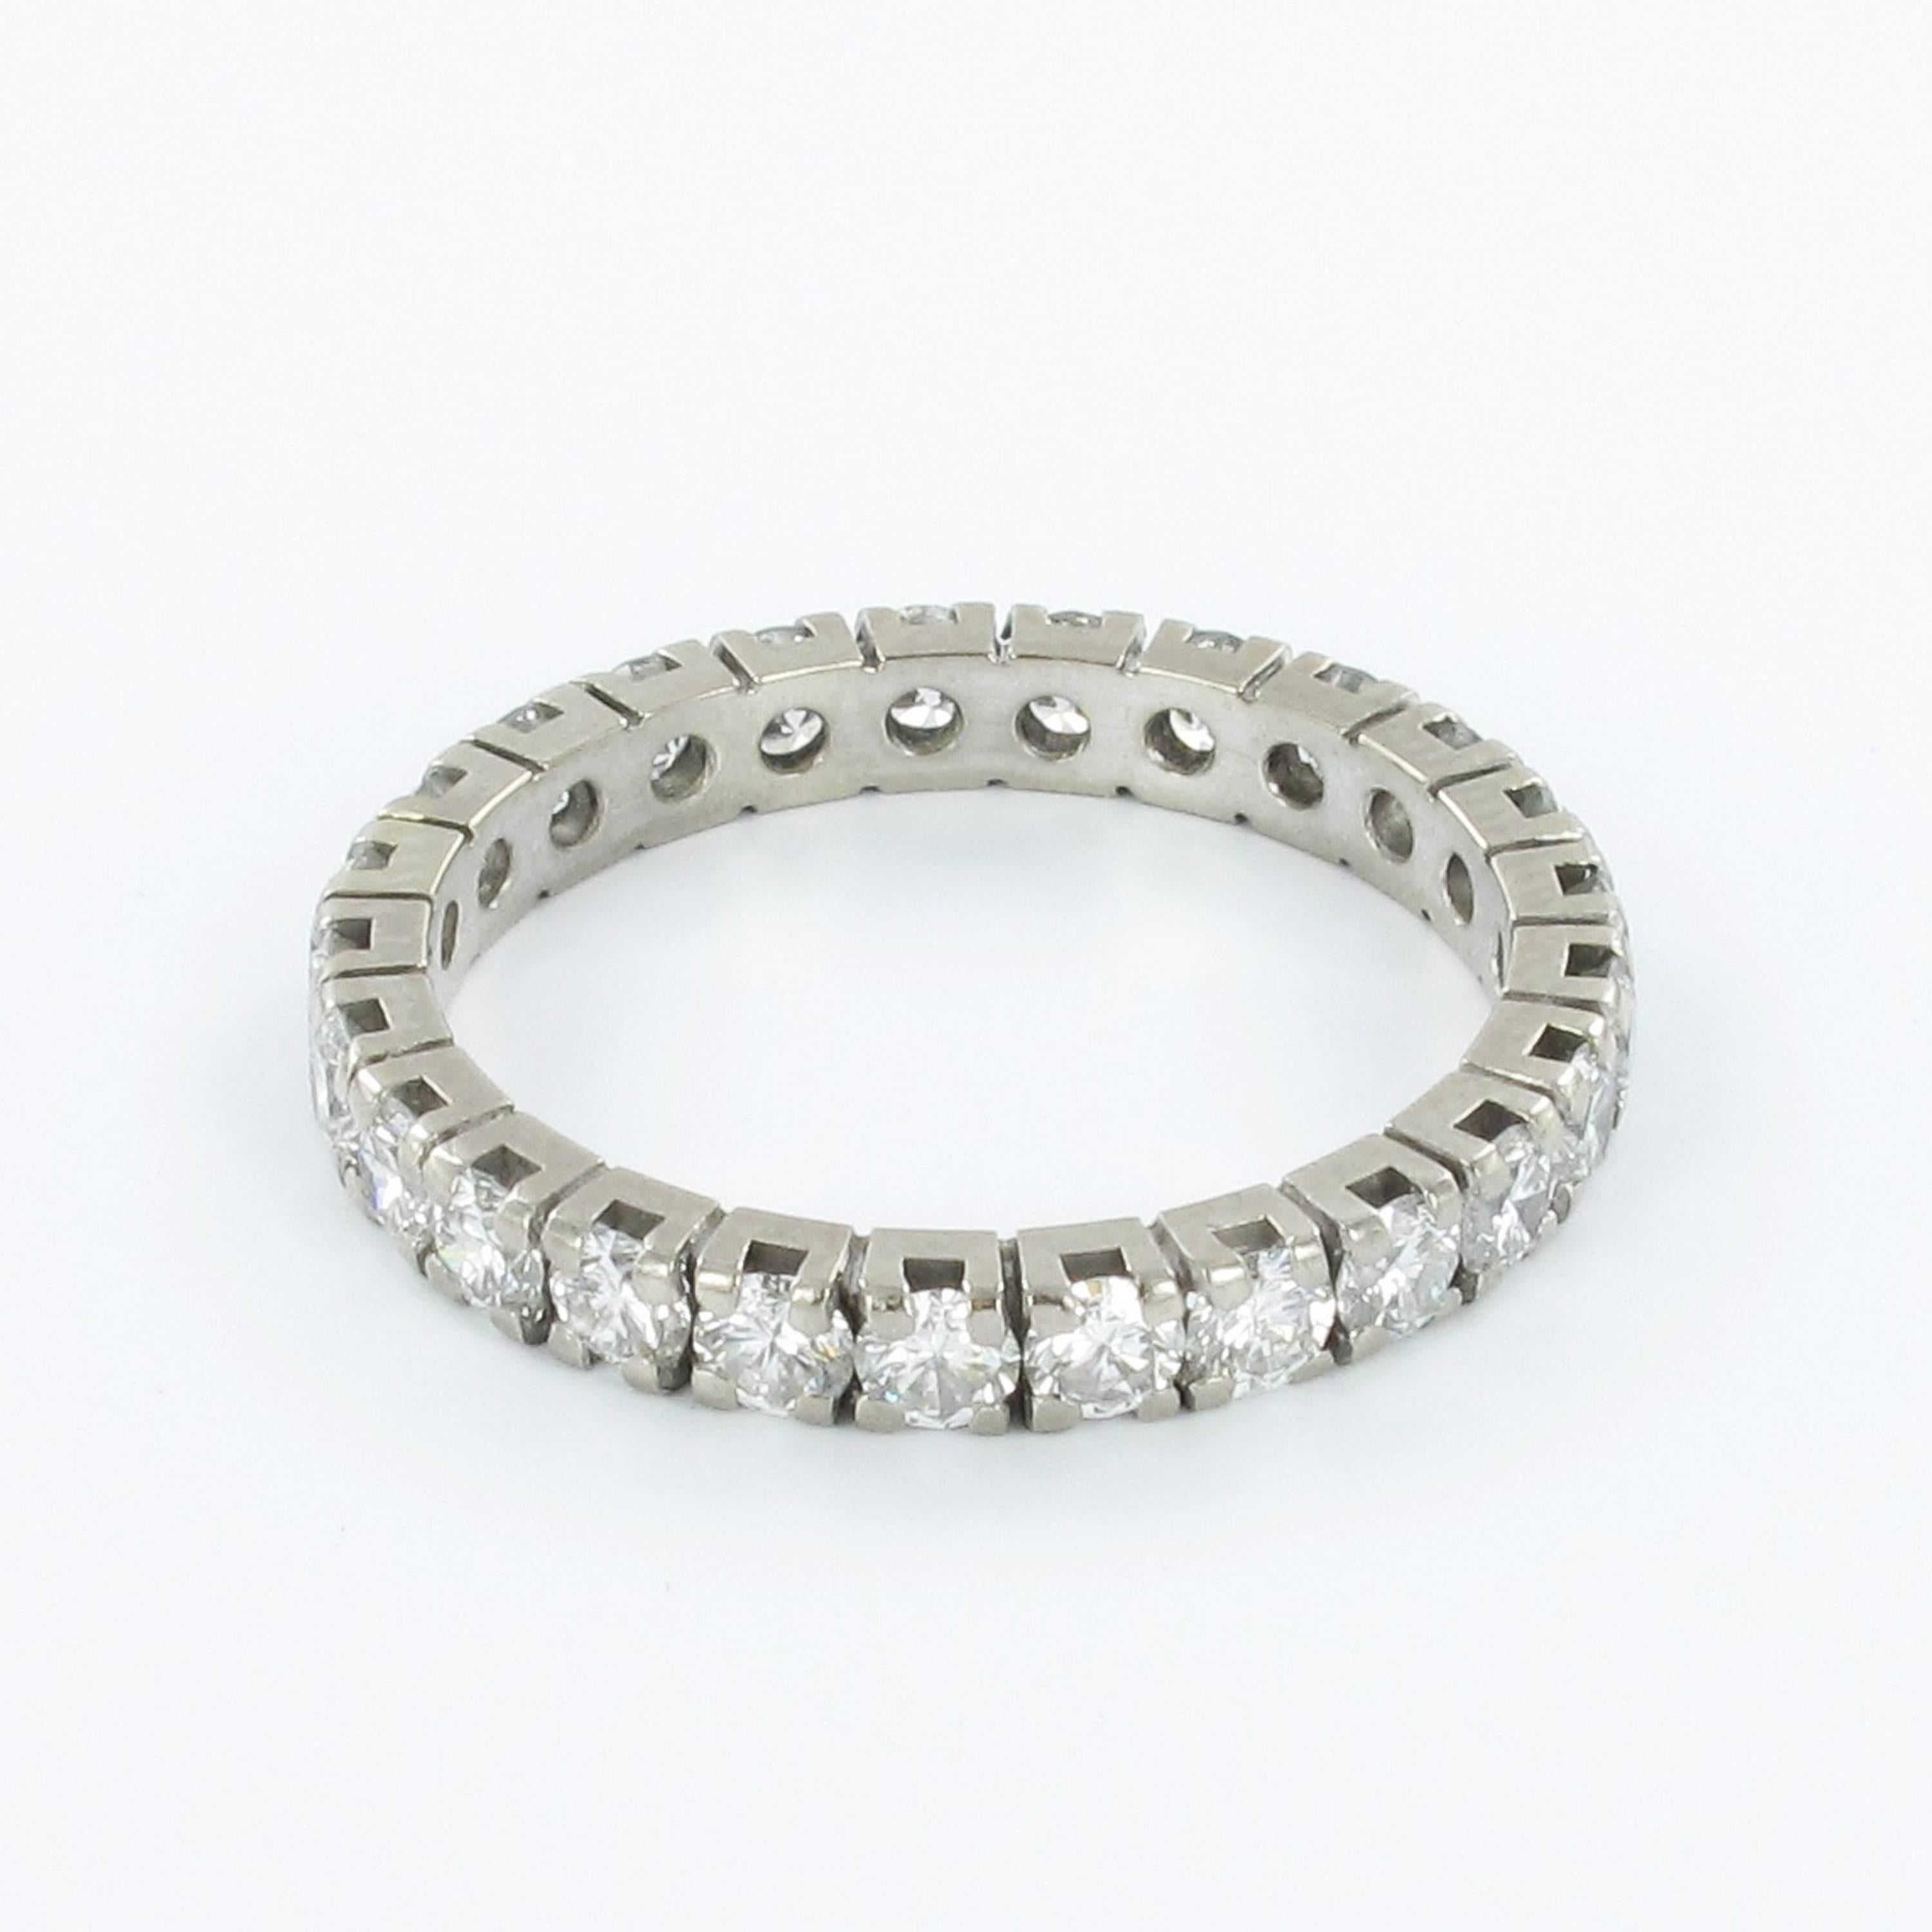 Diamond eternity band in 18 white gold. Featuring 25brilliant cut diamonds with G-H colour and vs clarity. Total weight approximately 1.63 carats. Size 55, US 7-1/4

Stock number: 1000186480